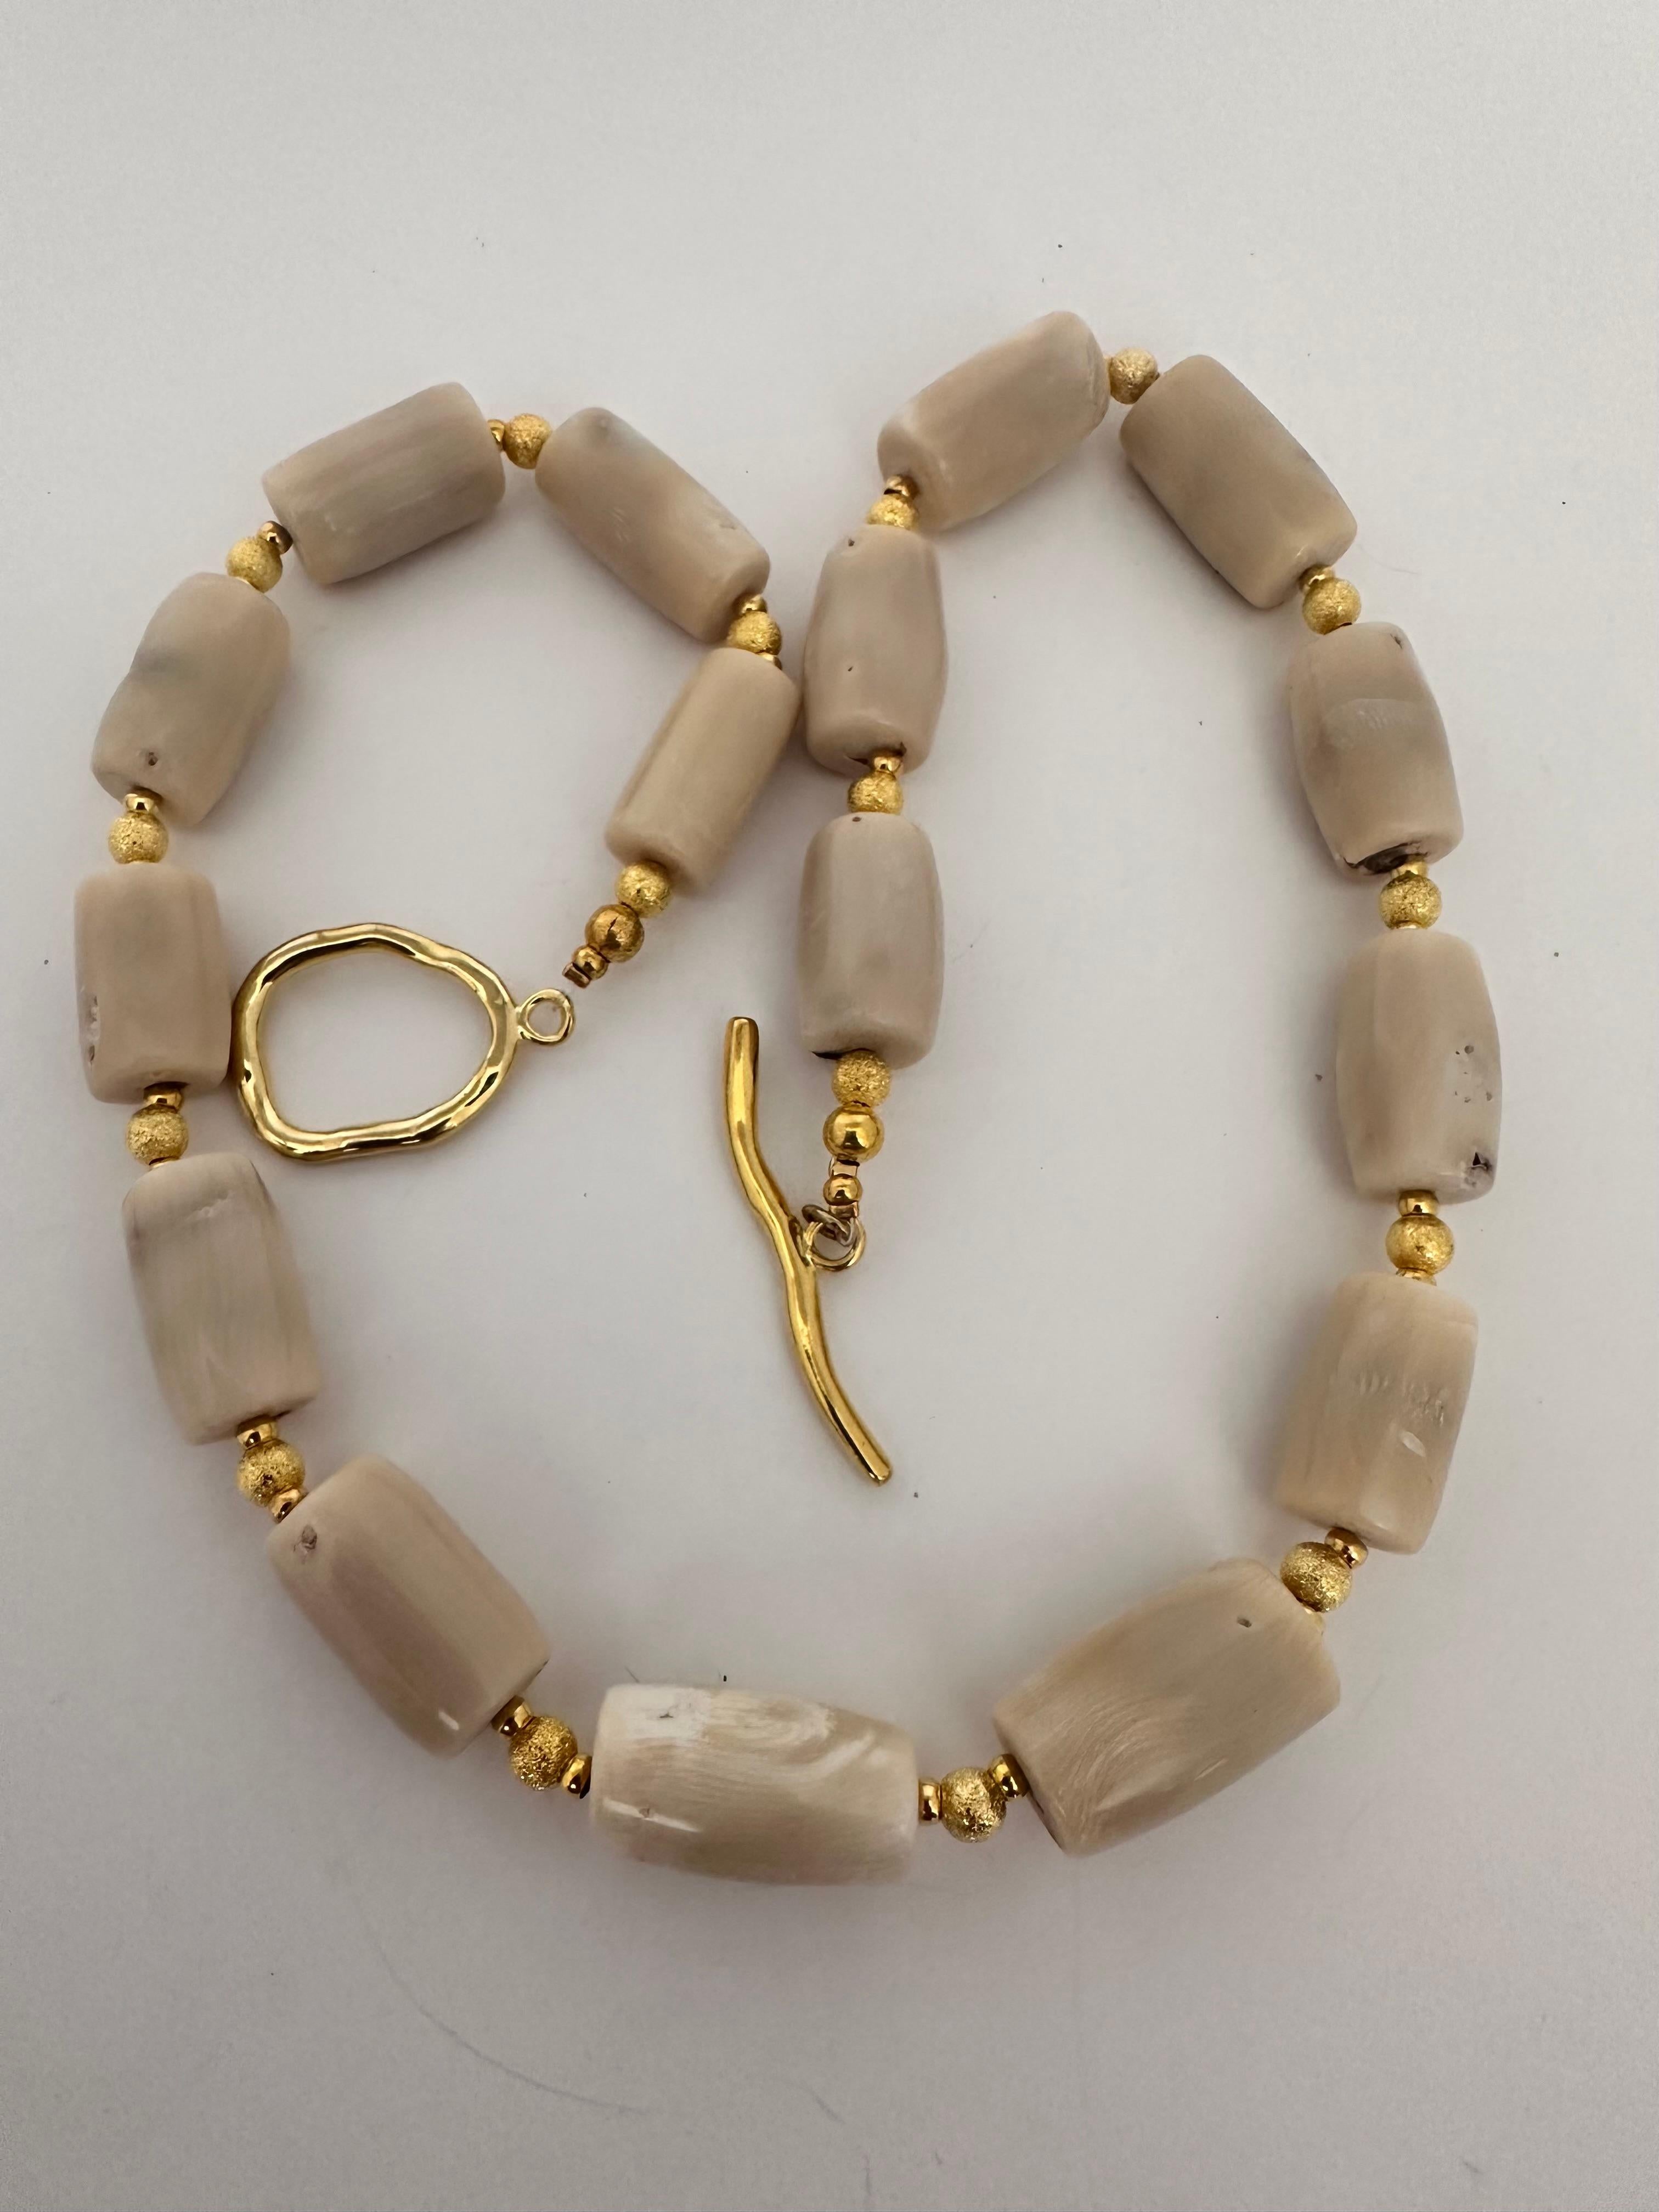 Artisan Handmade Gold Beads and White/Beige Coral Barrel Shaped Beaded 26